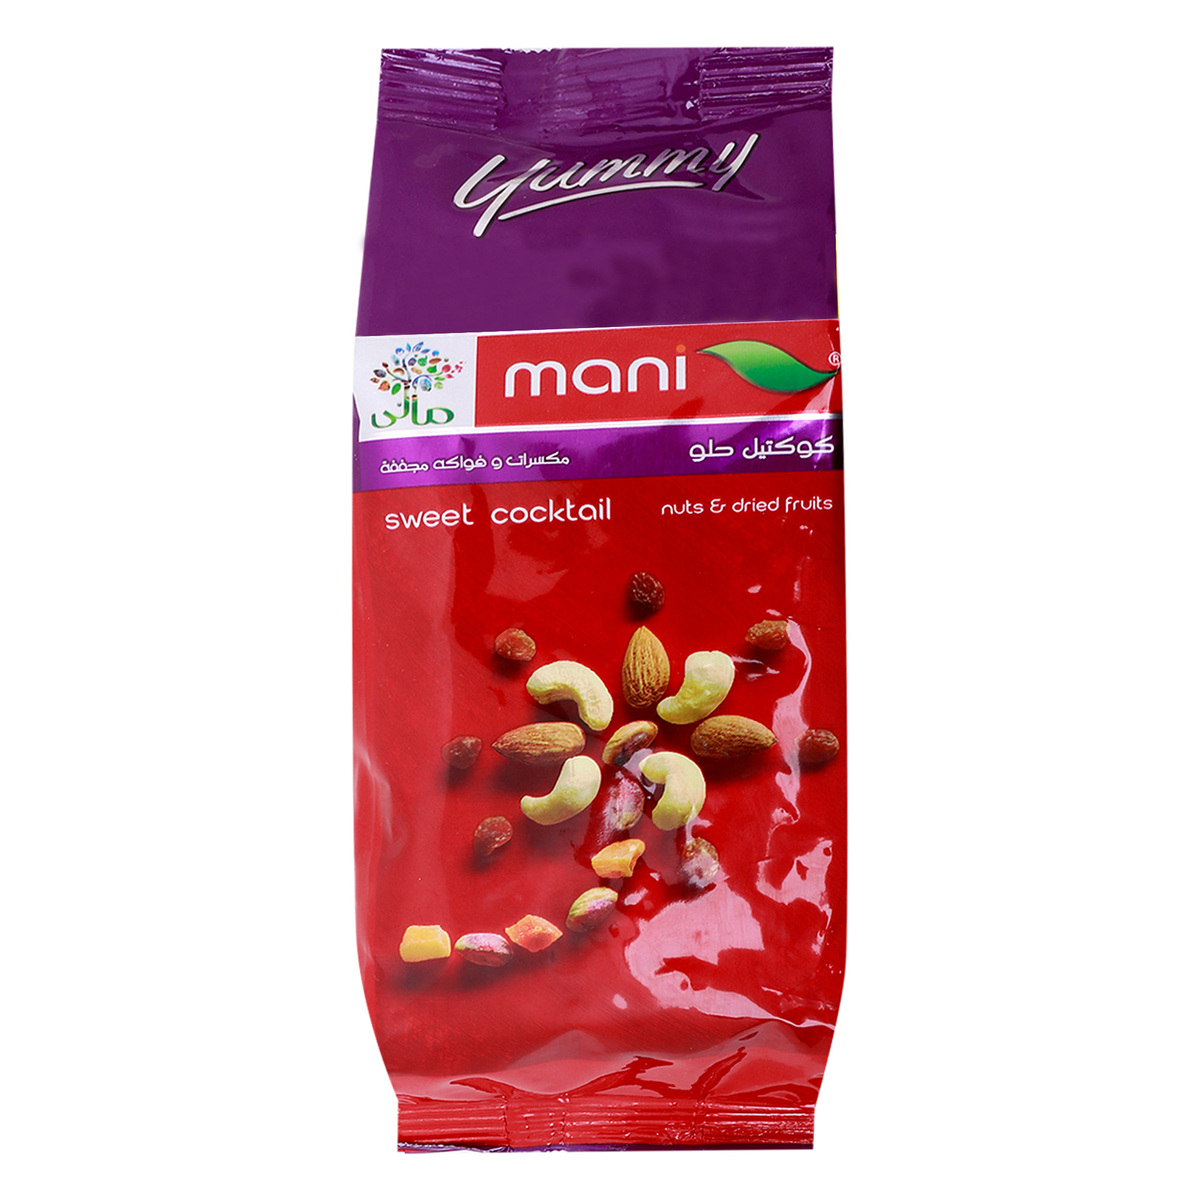 Mani Sweet Cocktail Mix Of Nuts & Dried Fruits 200g